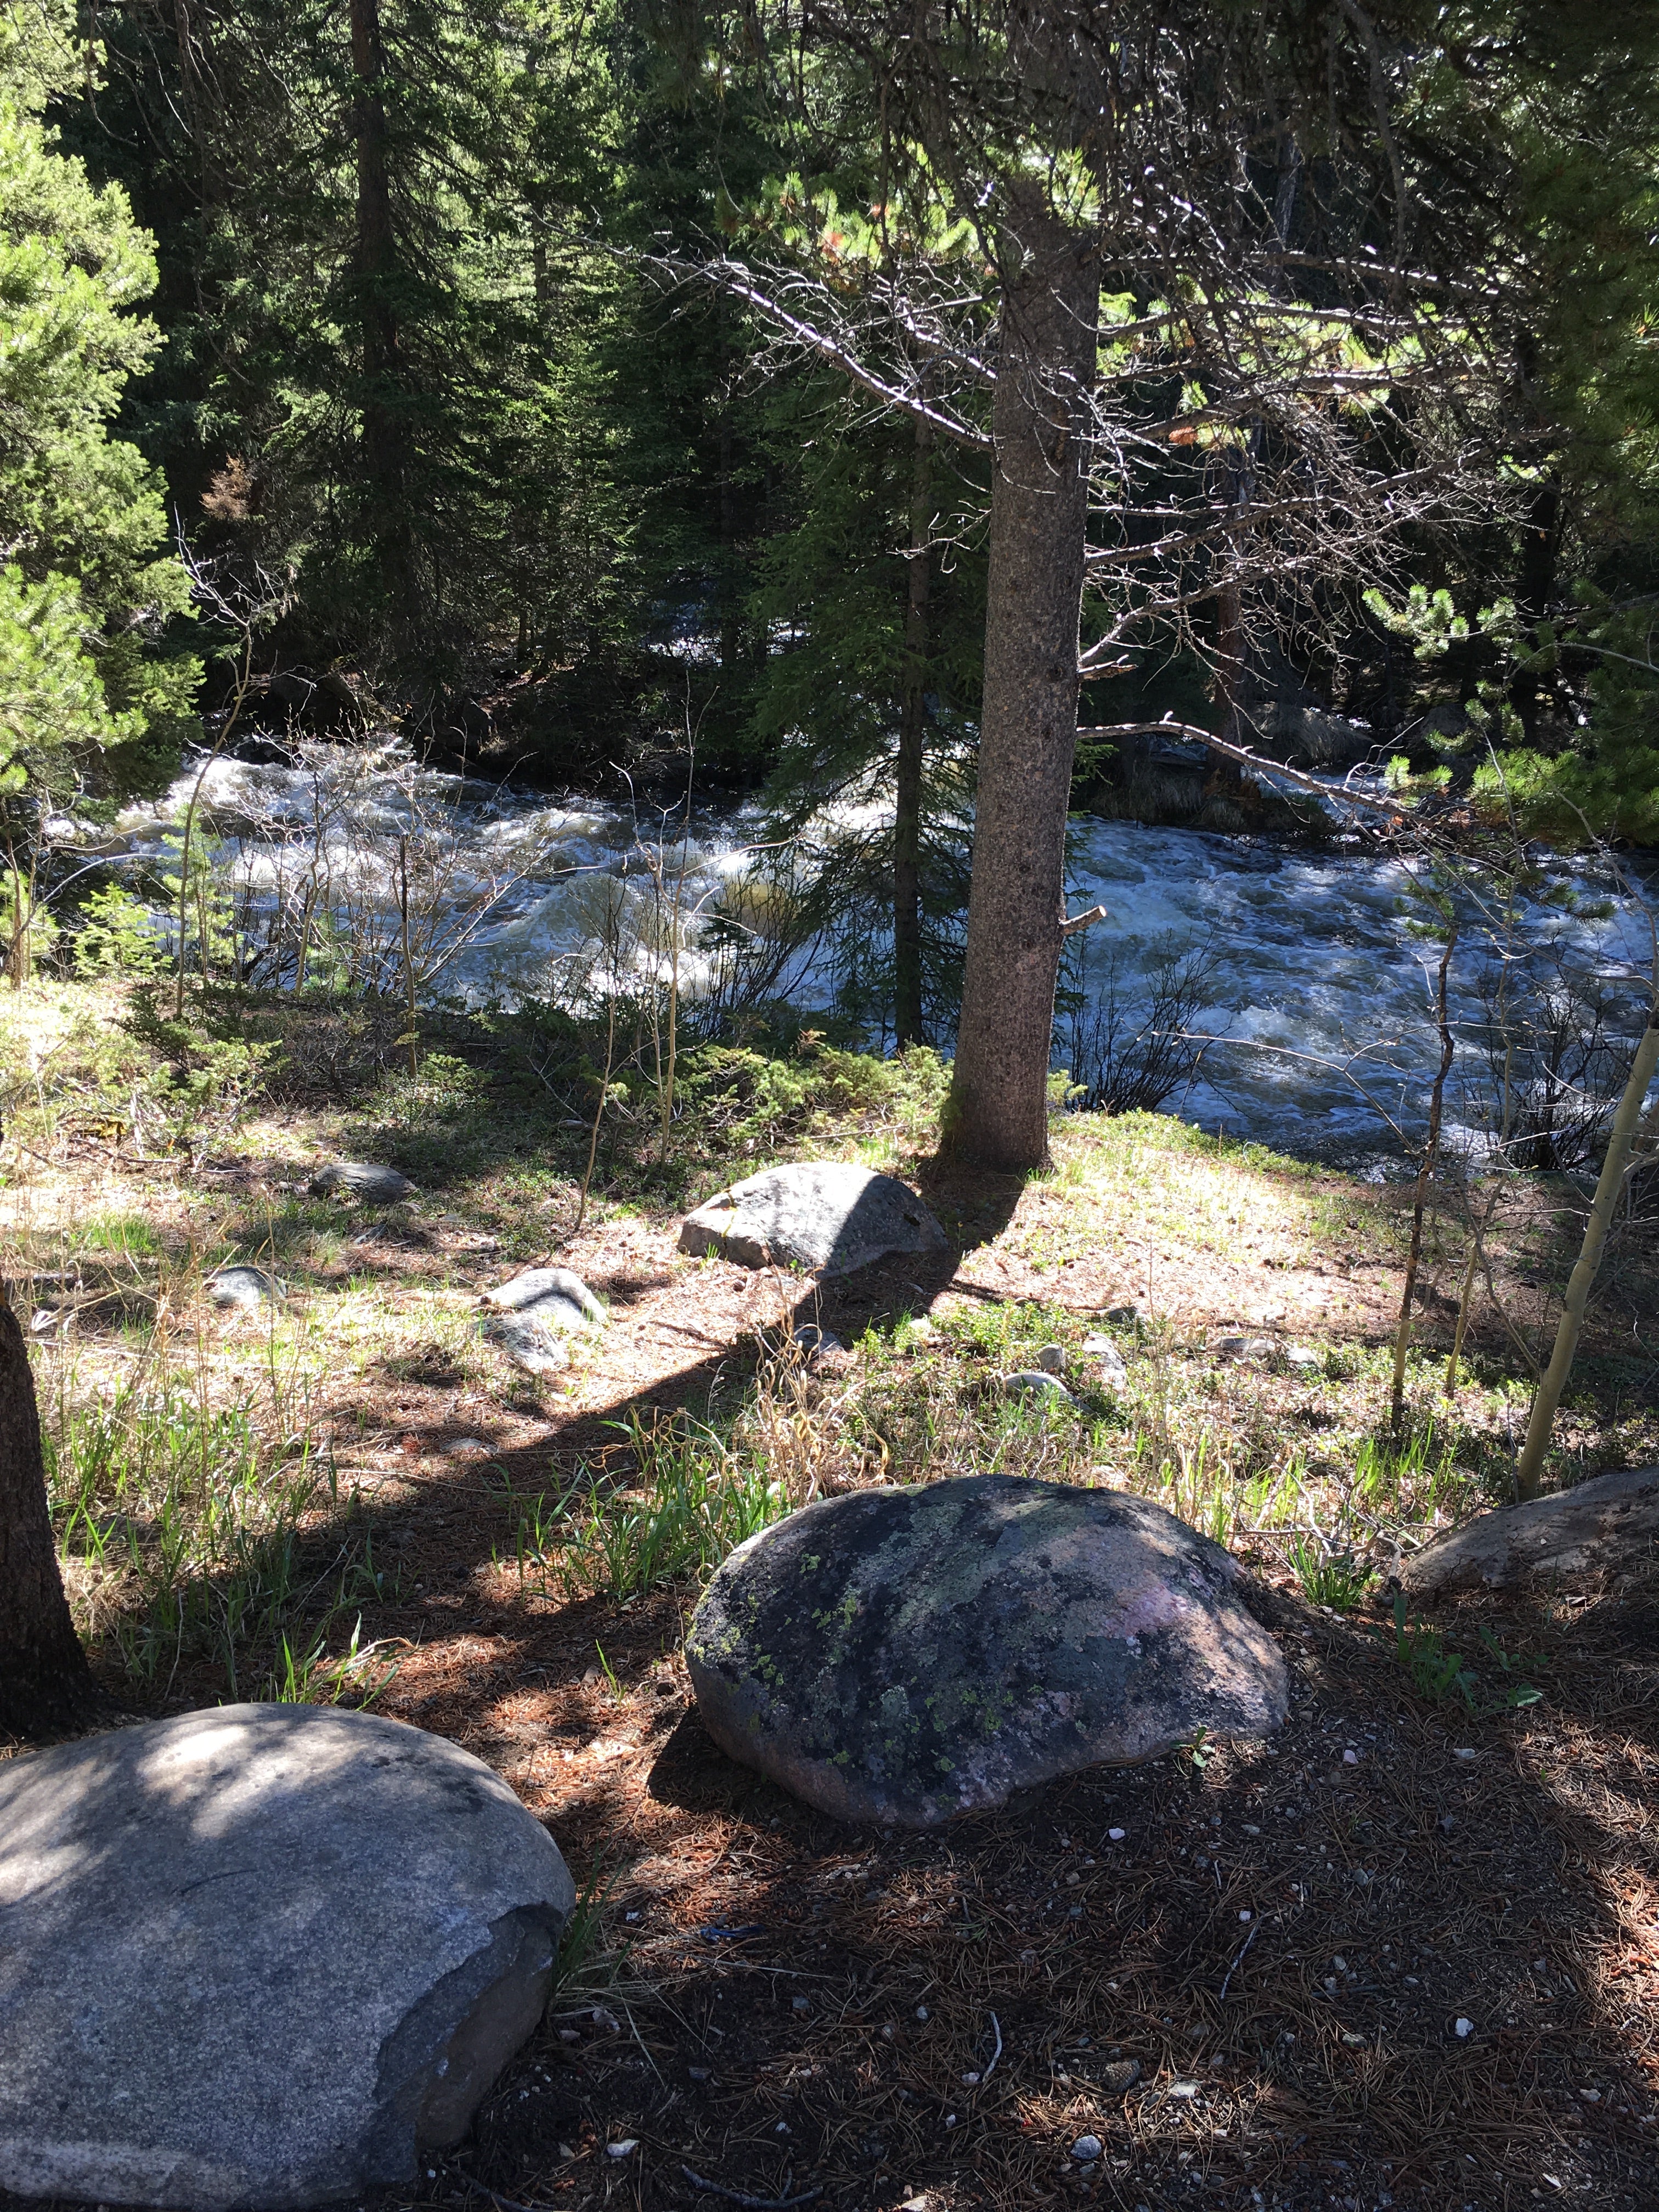 West Tensleep Creek can be heard throughout the campground